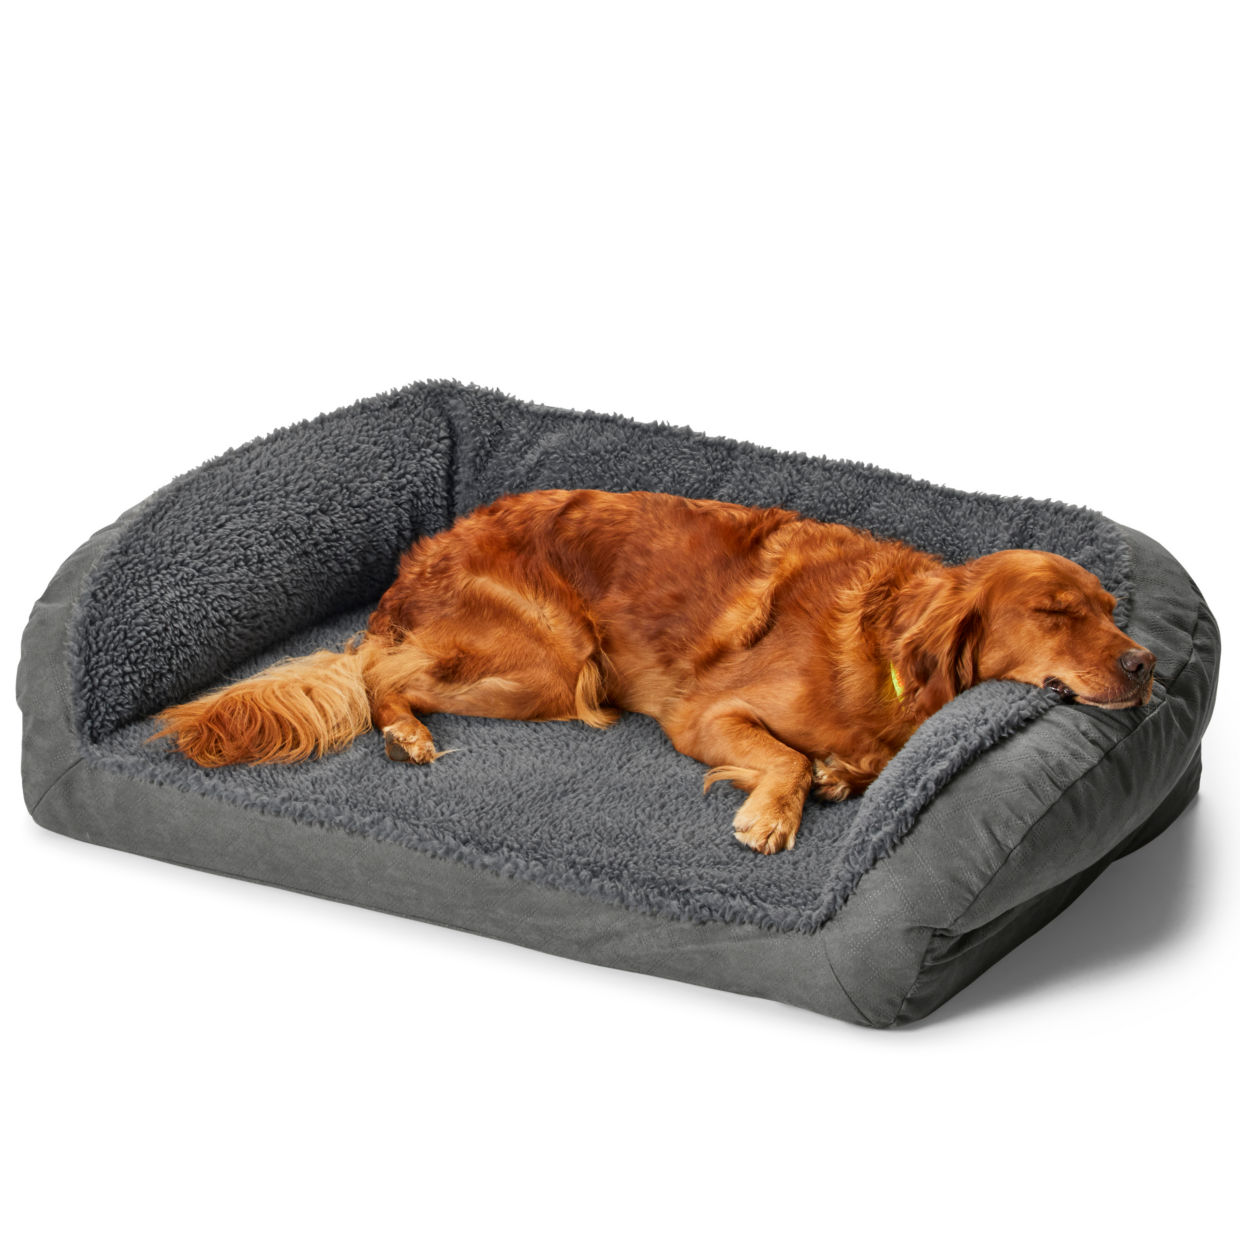 Orvis AirFoam Bolster Dog Bed with Fleece